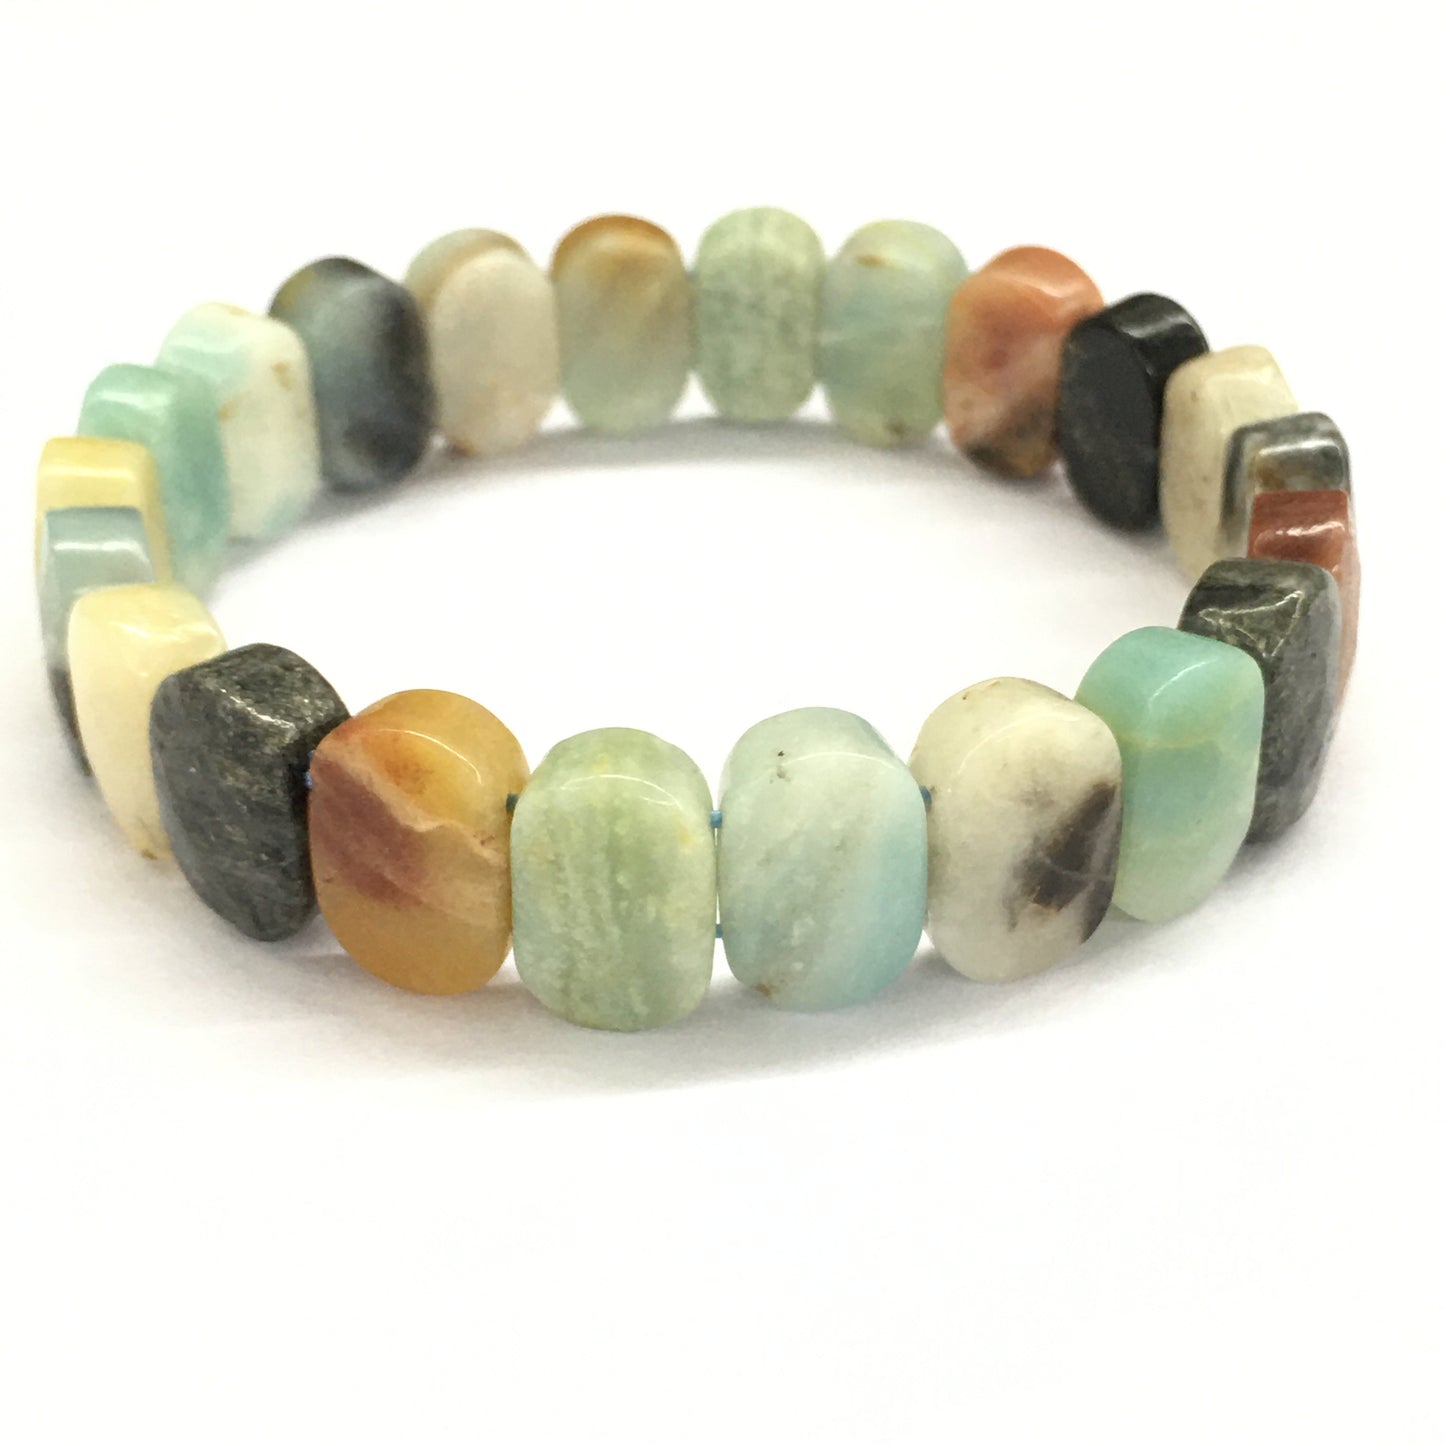 Black Cloudy Amazonite Faceted Oval 8X14mm Bracelet